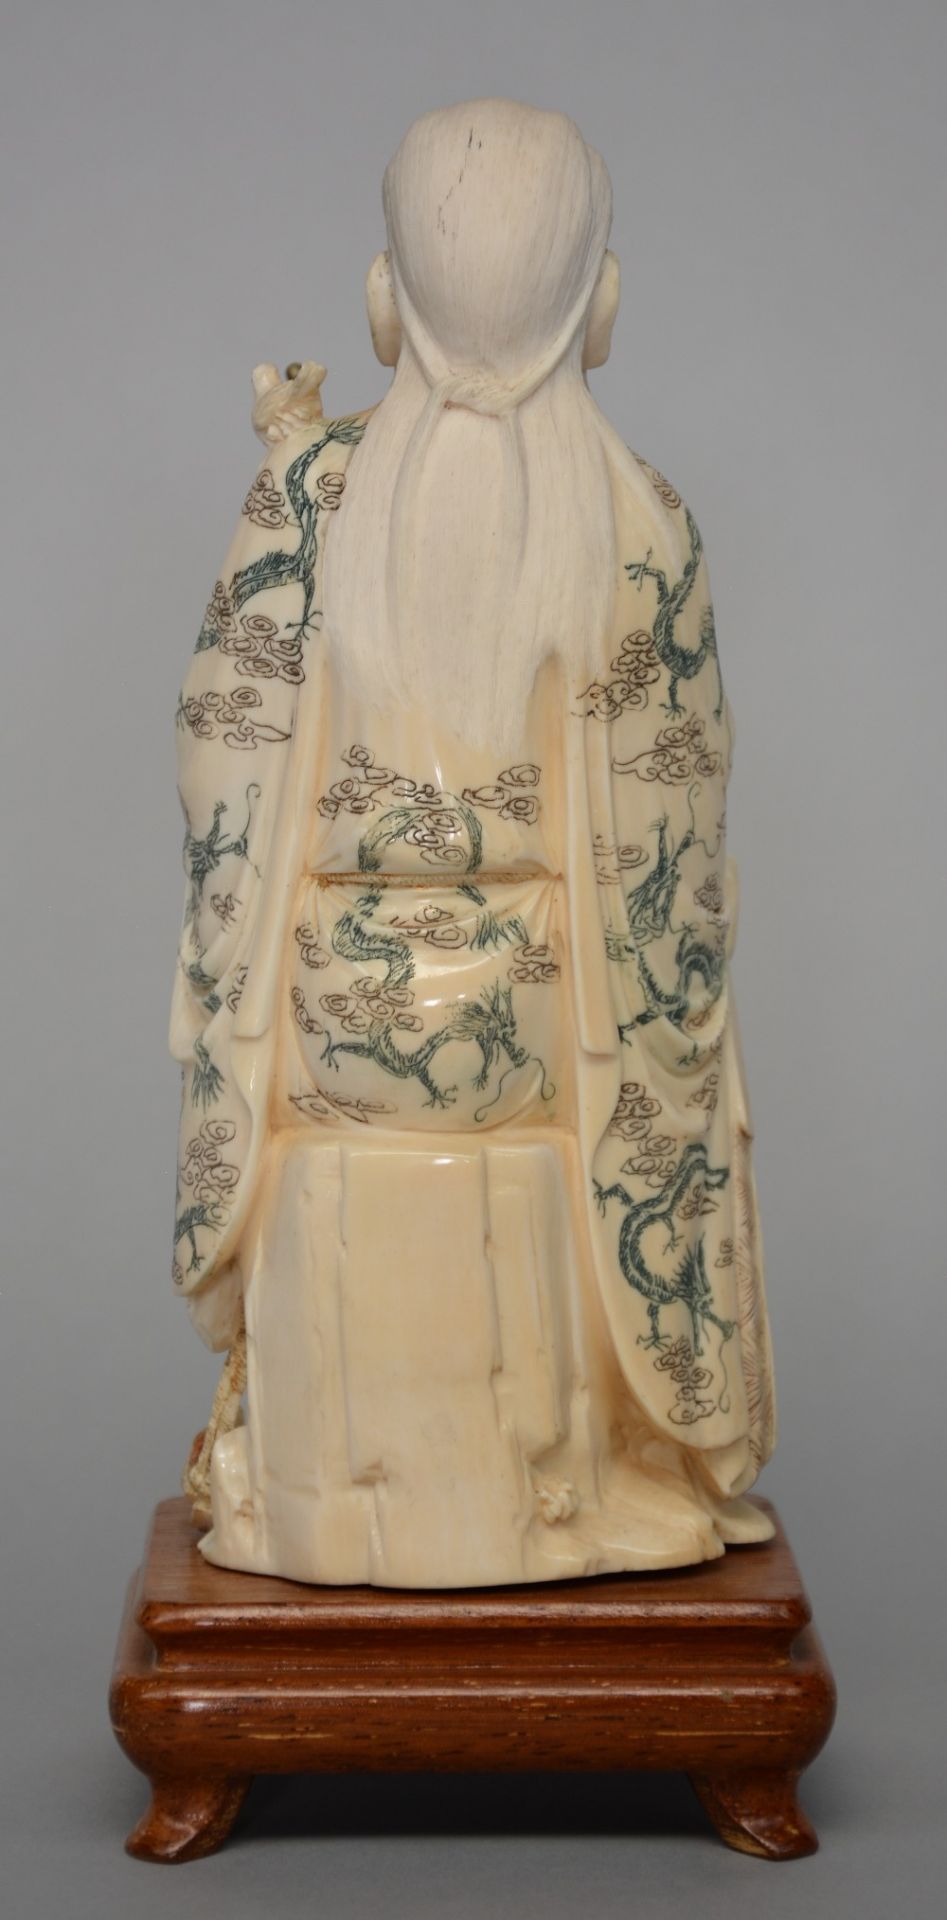 A Chinese ivory sculpture of a deity, on wooden base, scrimshaw decorated, first half 20thC, H 25 cm - Image 3 of 4